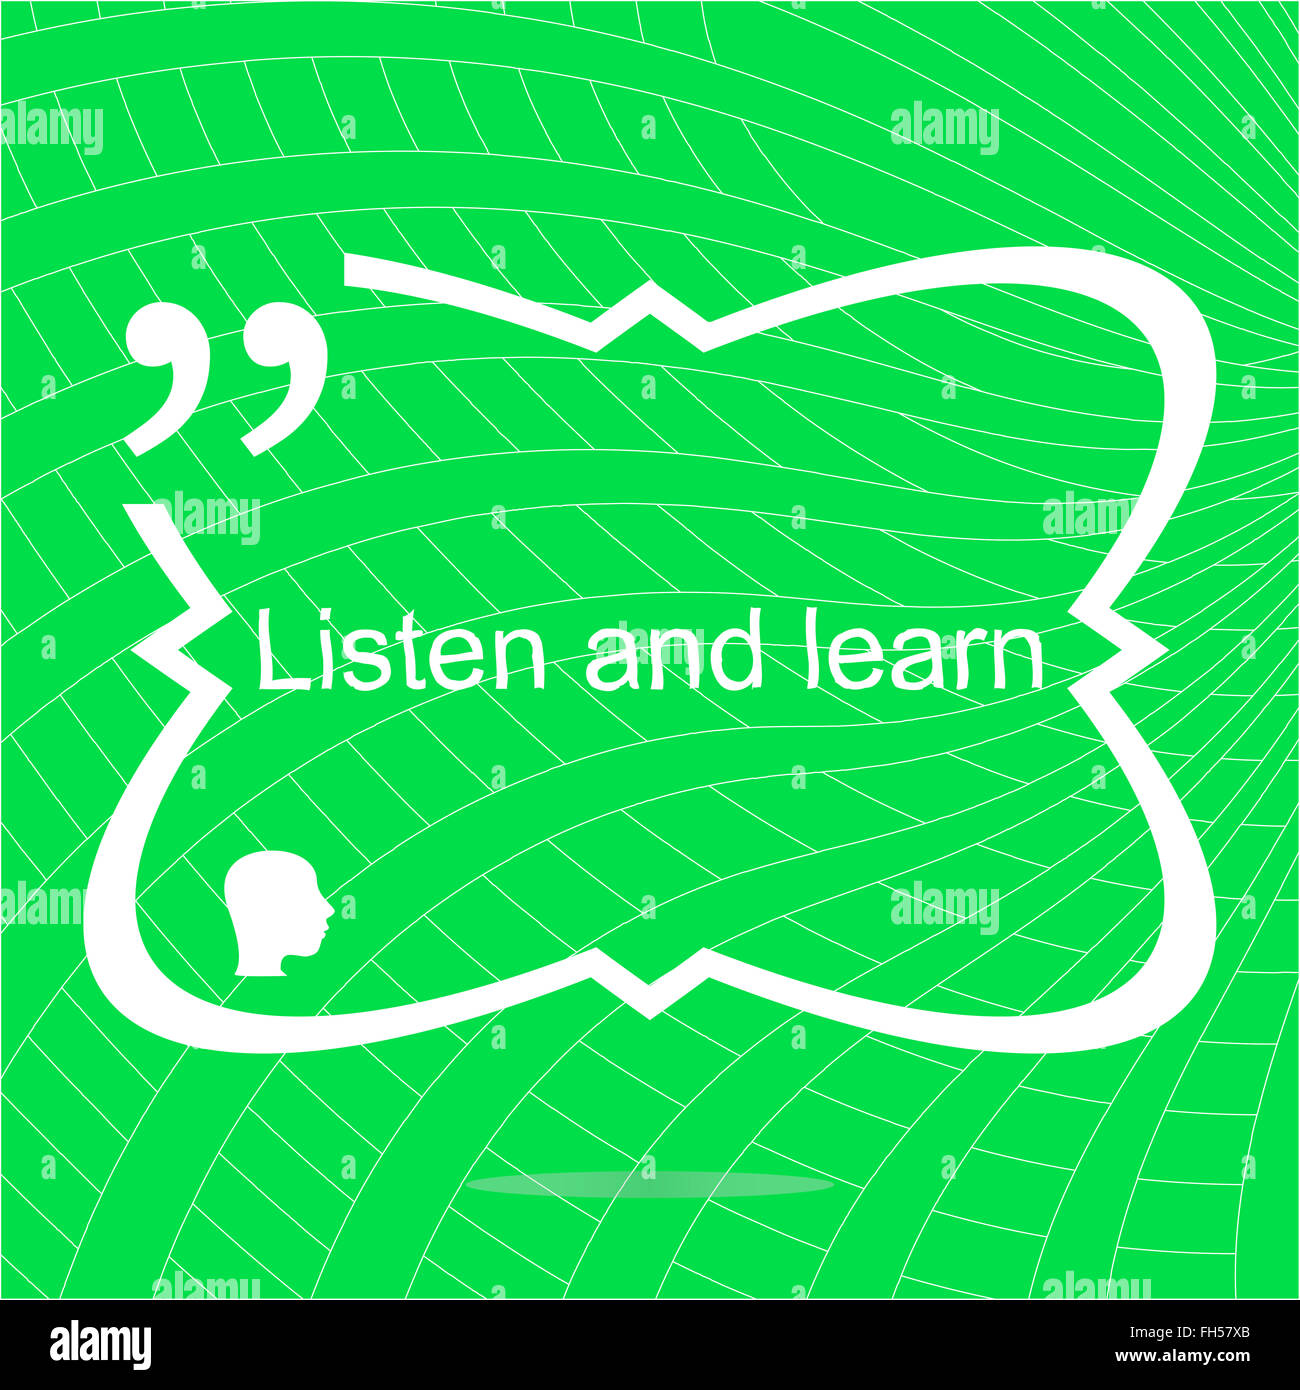 Listen and learn. Inspirational motivational quote. Simple trendy design. Positive quote. Vector illustration Stock Photo